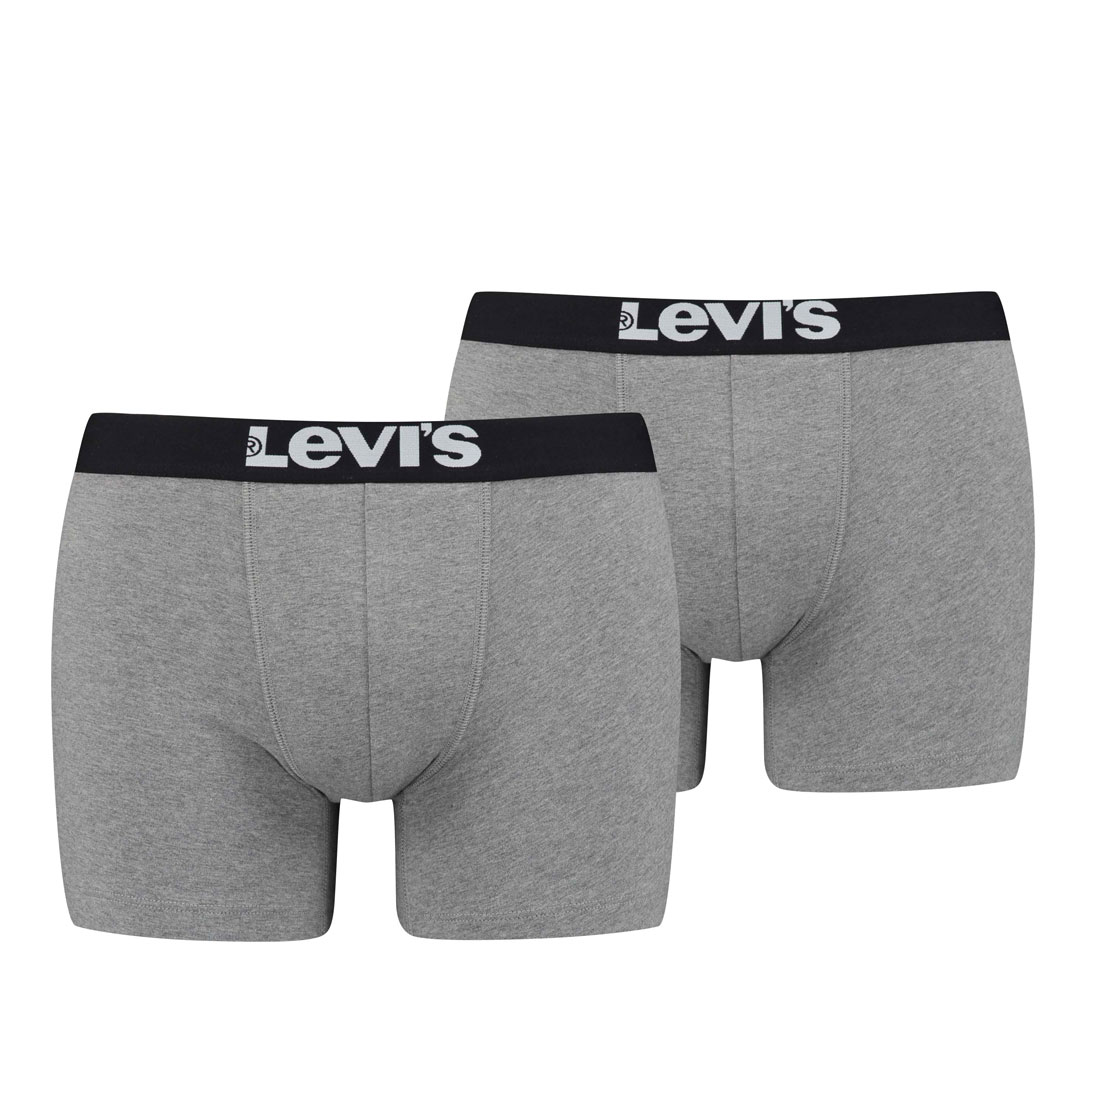 Боксеры Levi´s BoxershortsLEVIS Men Solid Basic Boxer Brief 2Pin758 - middle grey mélange, цвет BoxershortsLEVIS Men Solid Basic Boxer Brief 2Pin758 - middle grey mélange m xxxl men see through mesh patchwork boxer shorts zipper crotch wet look patent leather brief swimsuit club stage show costume